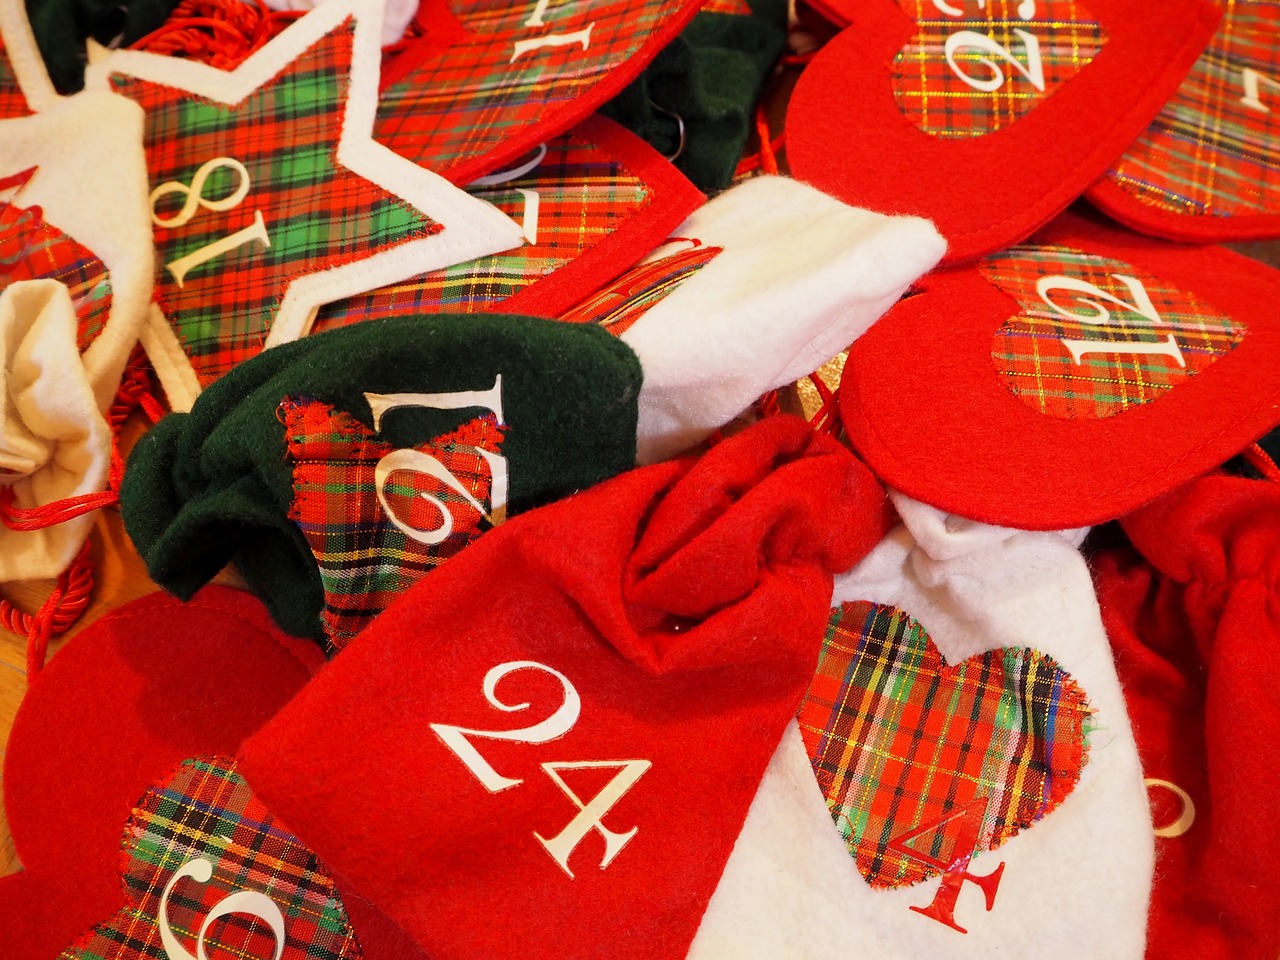 Fabric advent calendar with individual gift bags made of red and plaid fabric, each with a date on them. "24" is front and center.